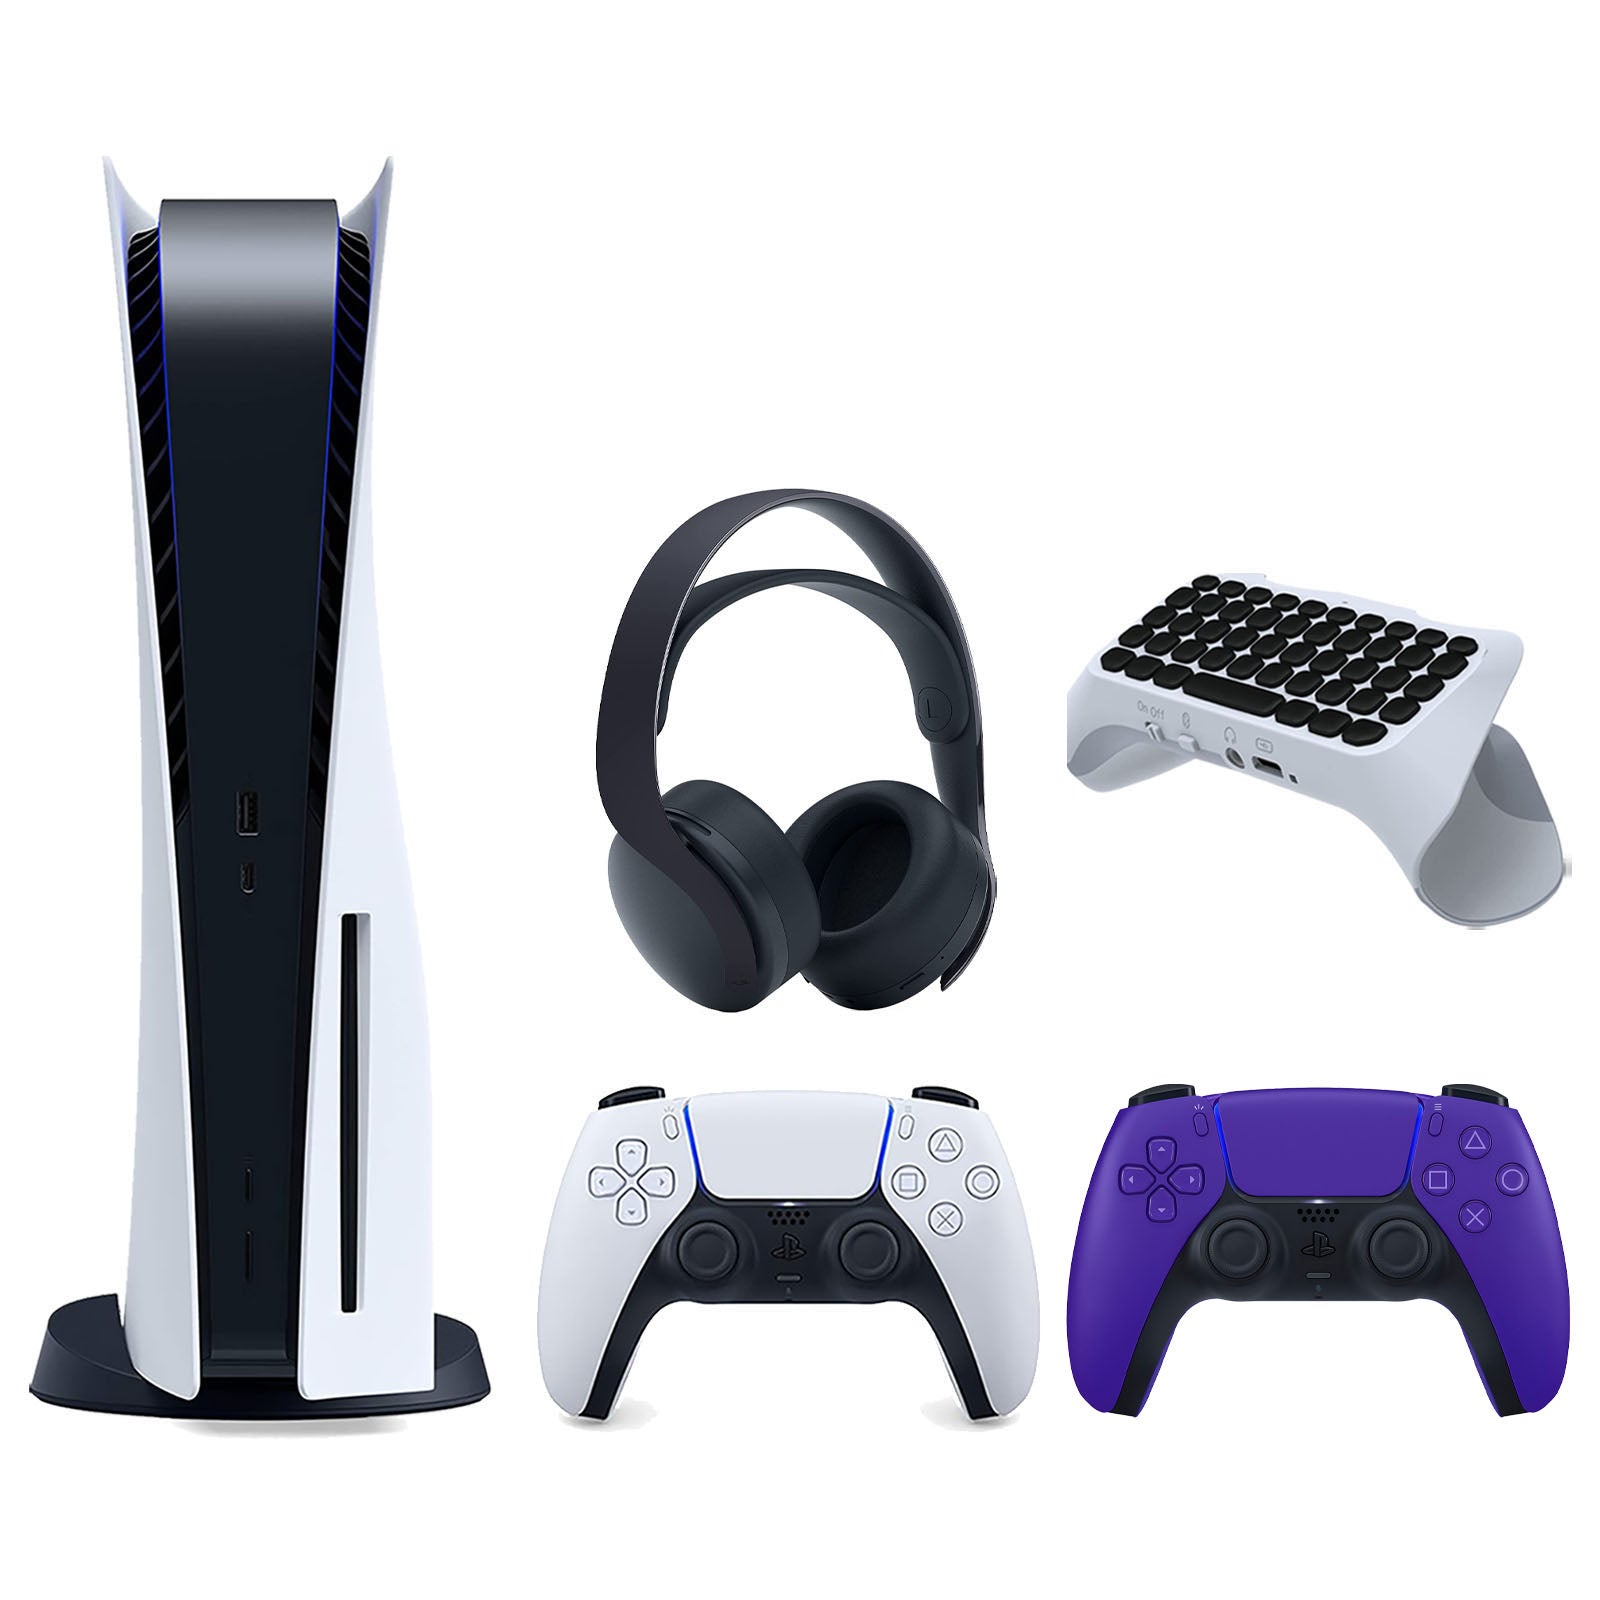 Sony Playstation 5 Disc Version Console with Extra Purple Controller, Black PULSE 3D Headset and Surge QuickType 2.0 Wireless PS5 Controller Keypad Bundle - Pro-Distributing